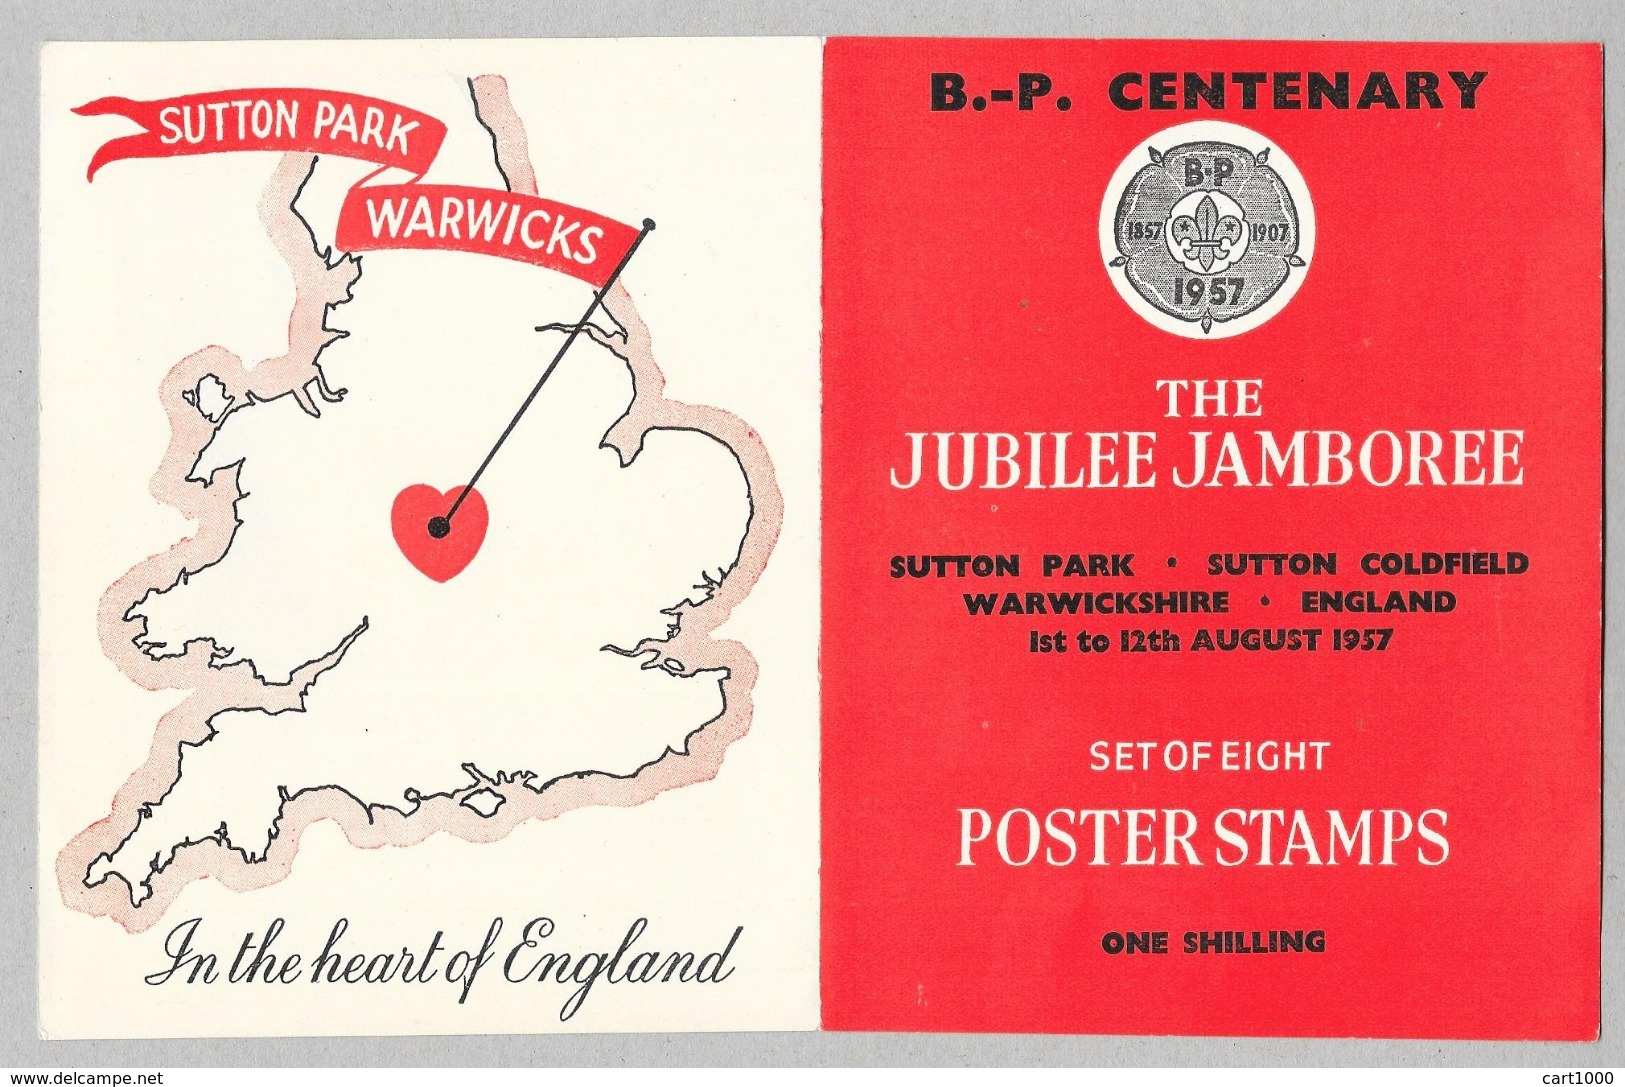 B.-P. CENTENARY THE JUBILEE JAMBOREE SET OF EIGHT POST STAMPS 1957 SCOUT - Cinderellas